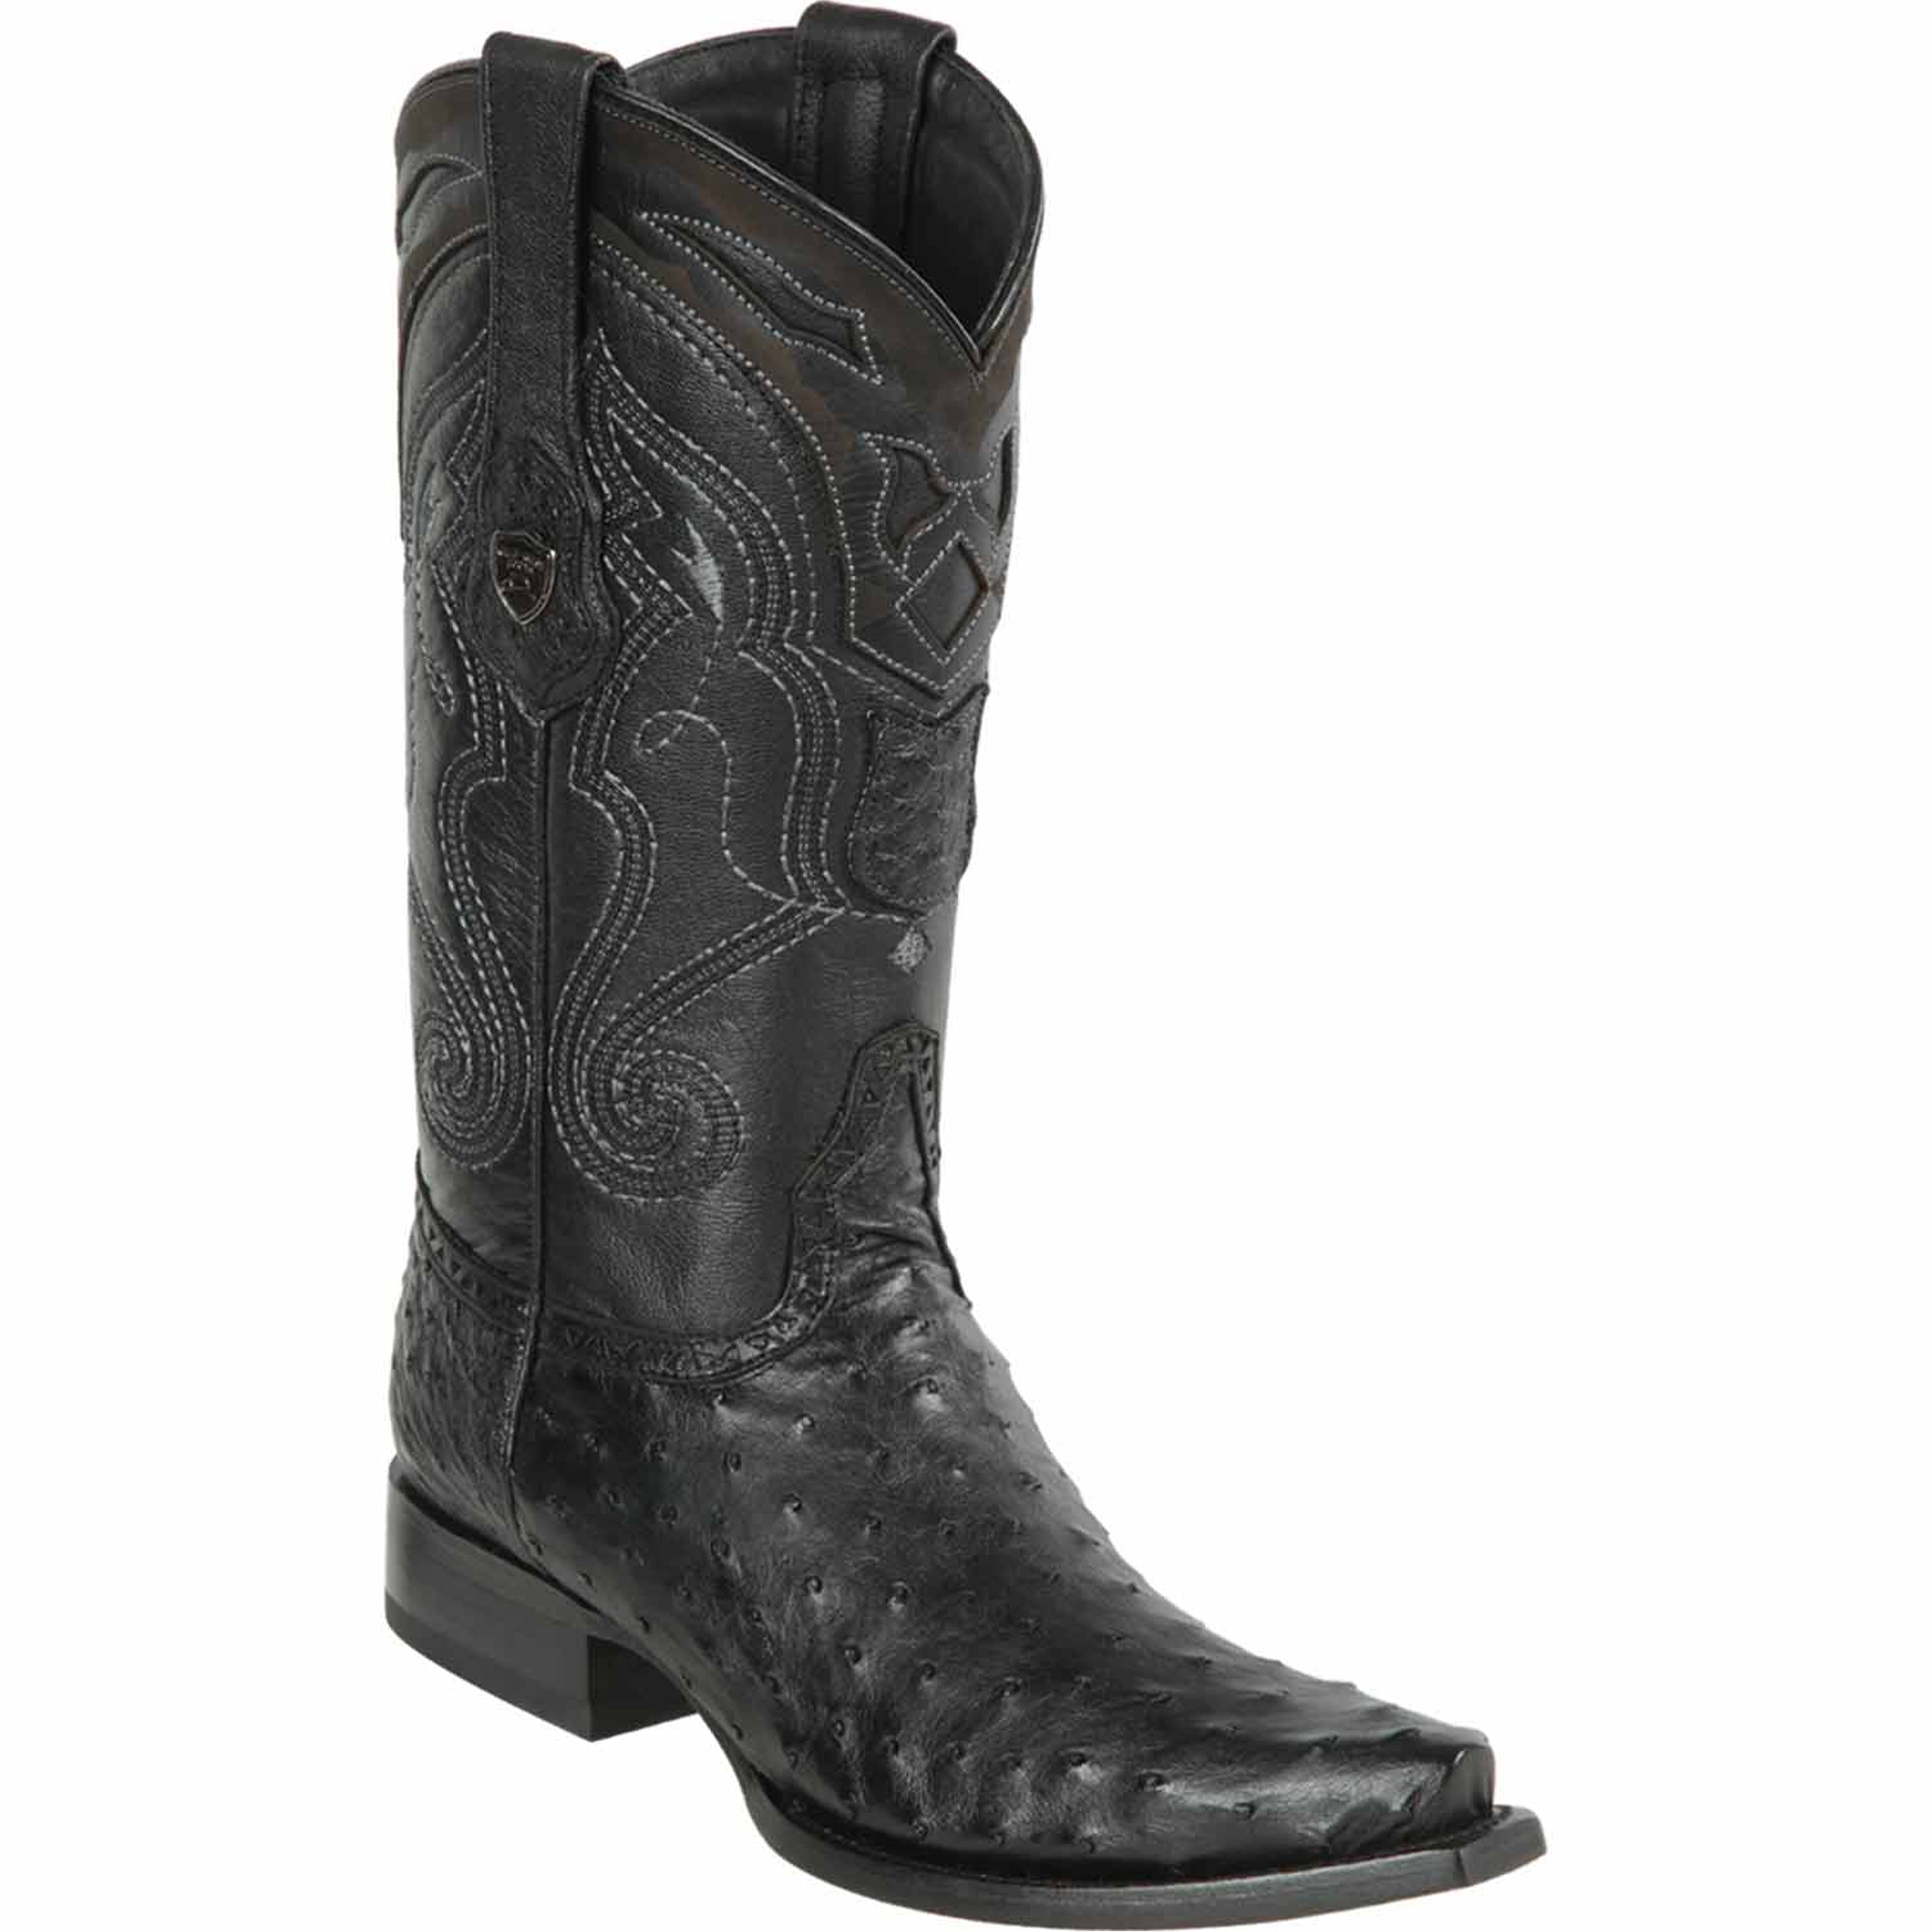 Black Ostrich Boots Snip Toe by Wild West Boots